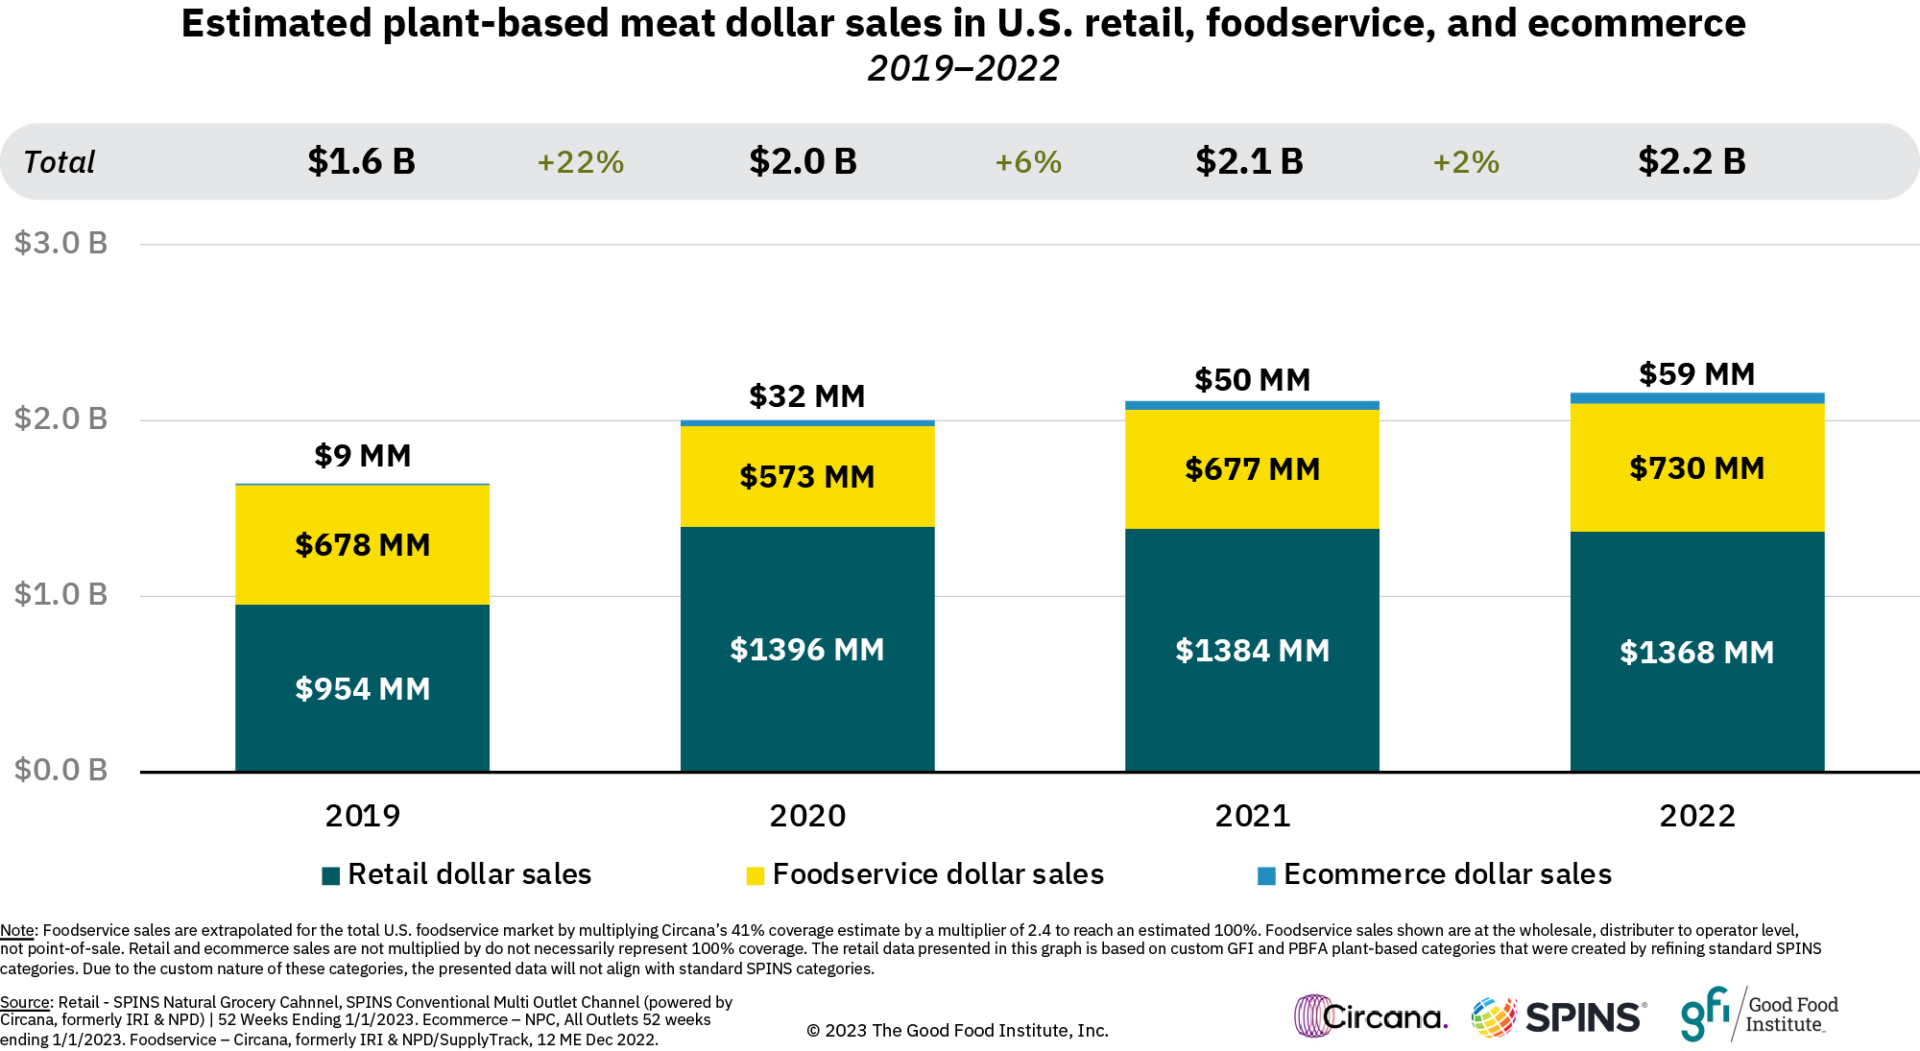 Plant-based meat retail, foodservice (estimated), and e-commerce dollar sales